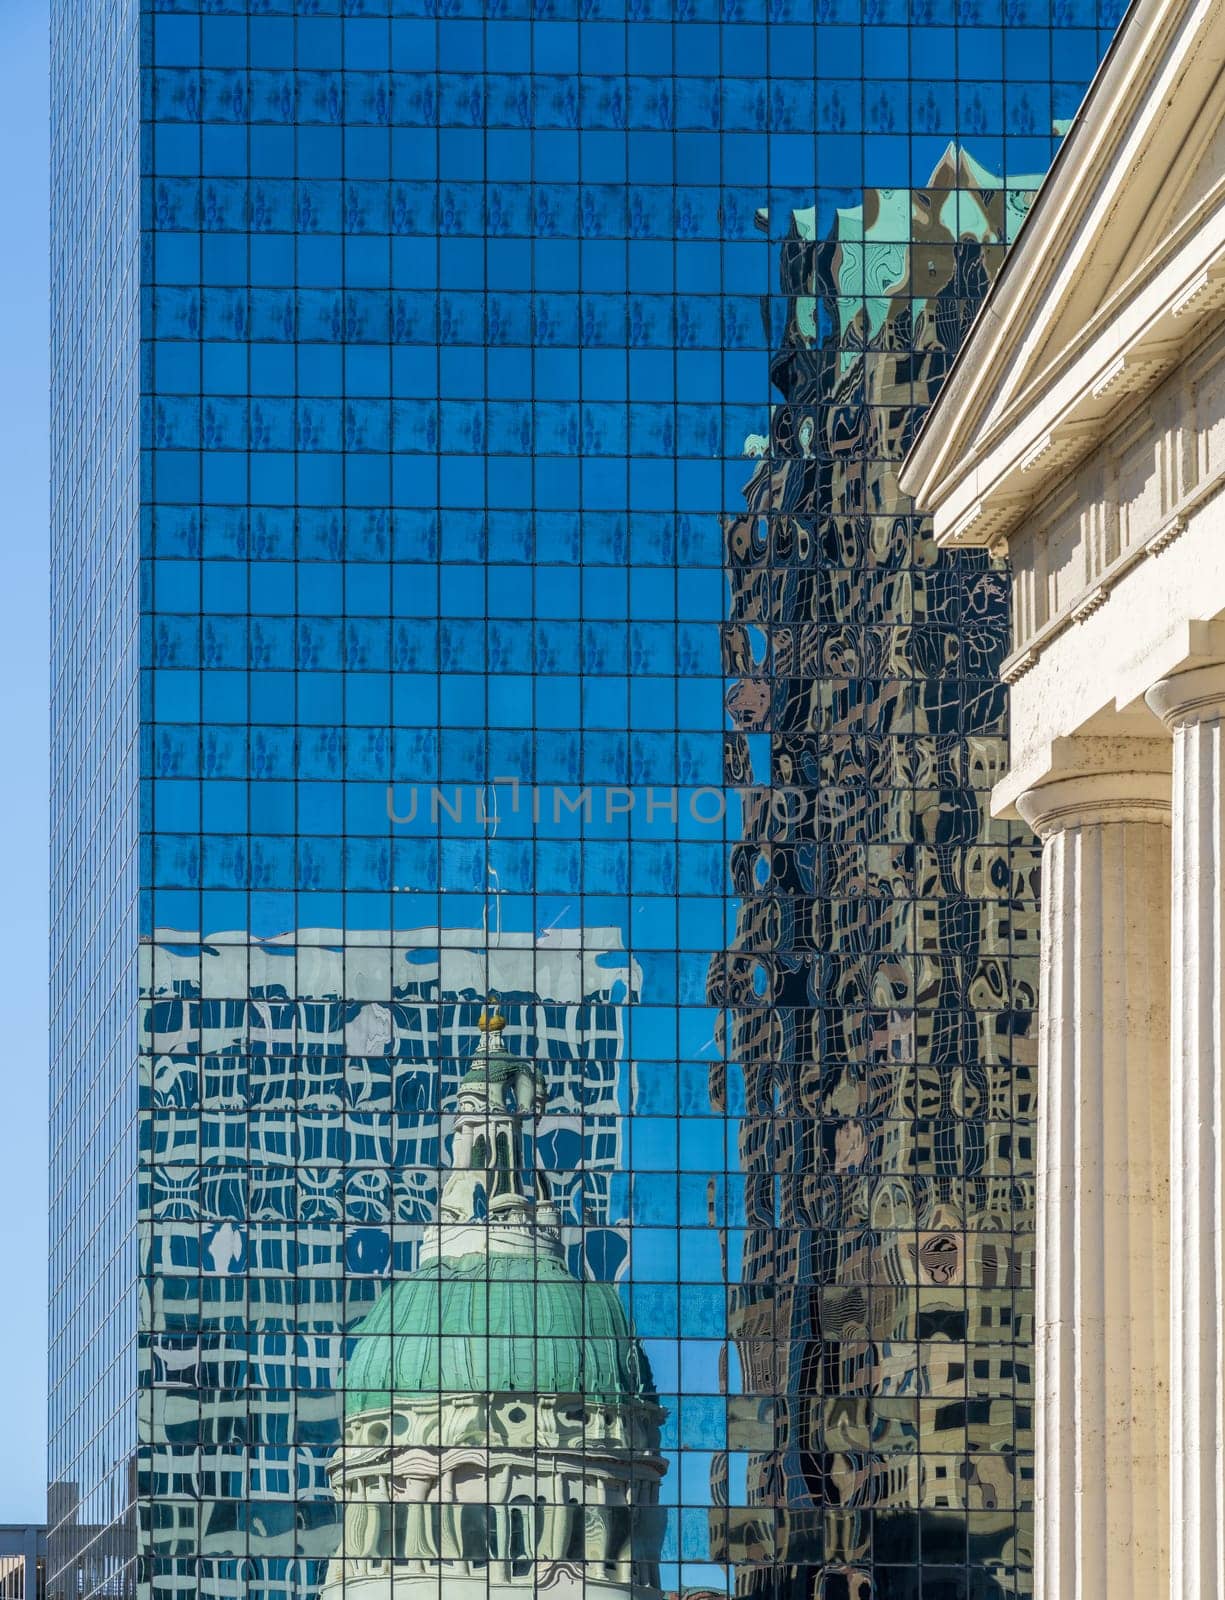 Reflections of Old Courthouse and modern office skyscraper in a mirrored building in downtown St Louis in Missouri